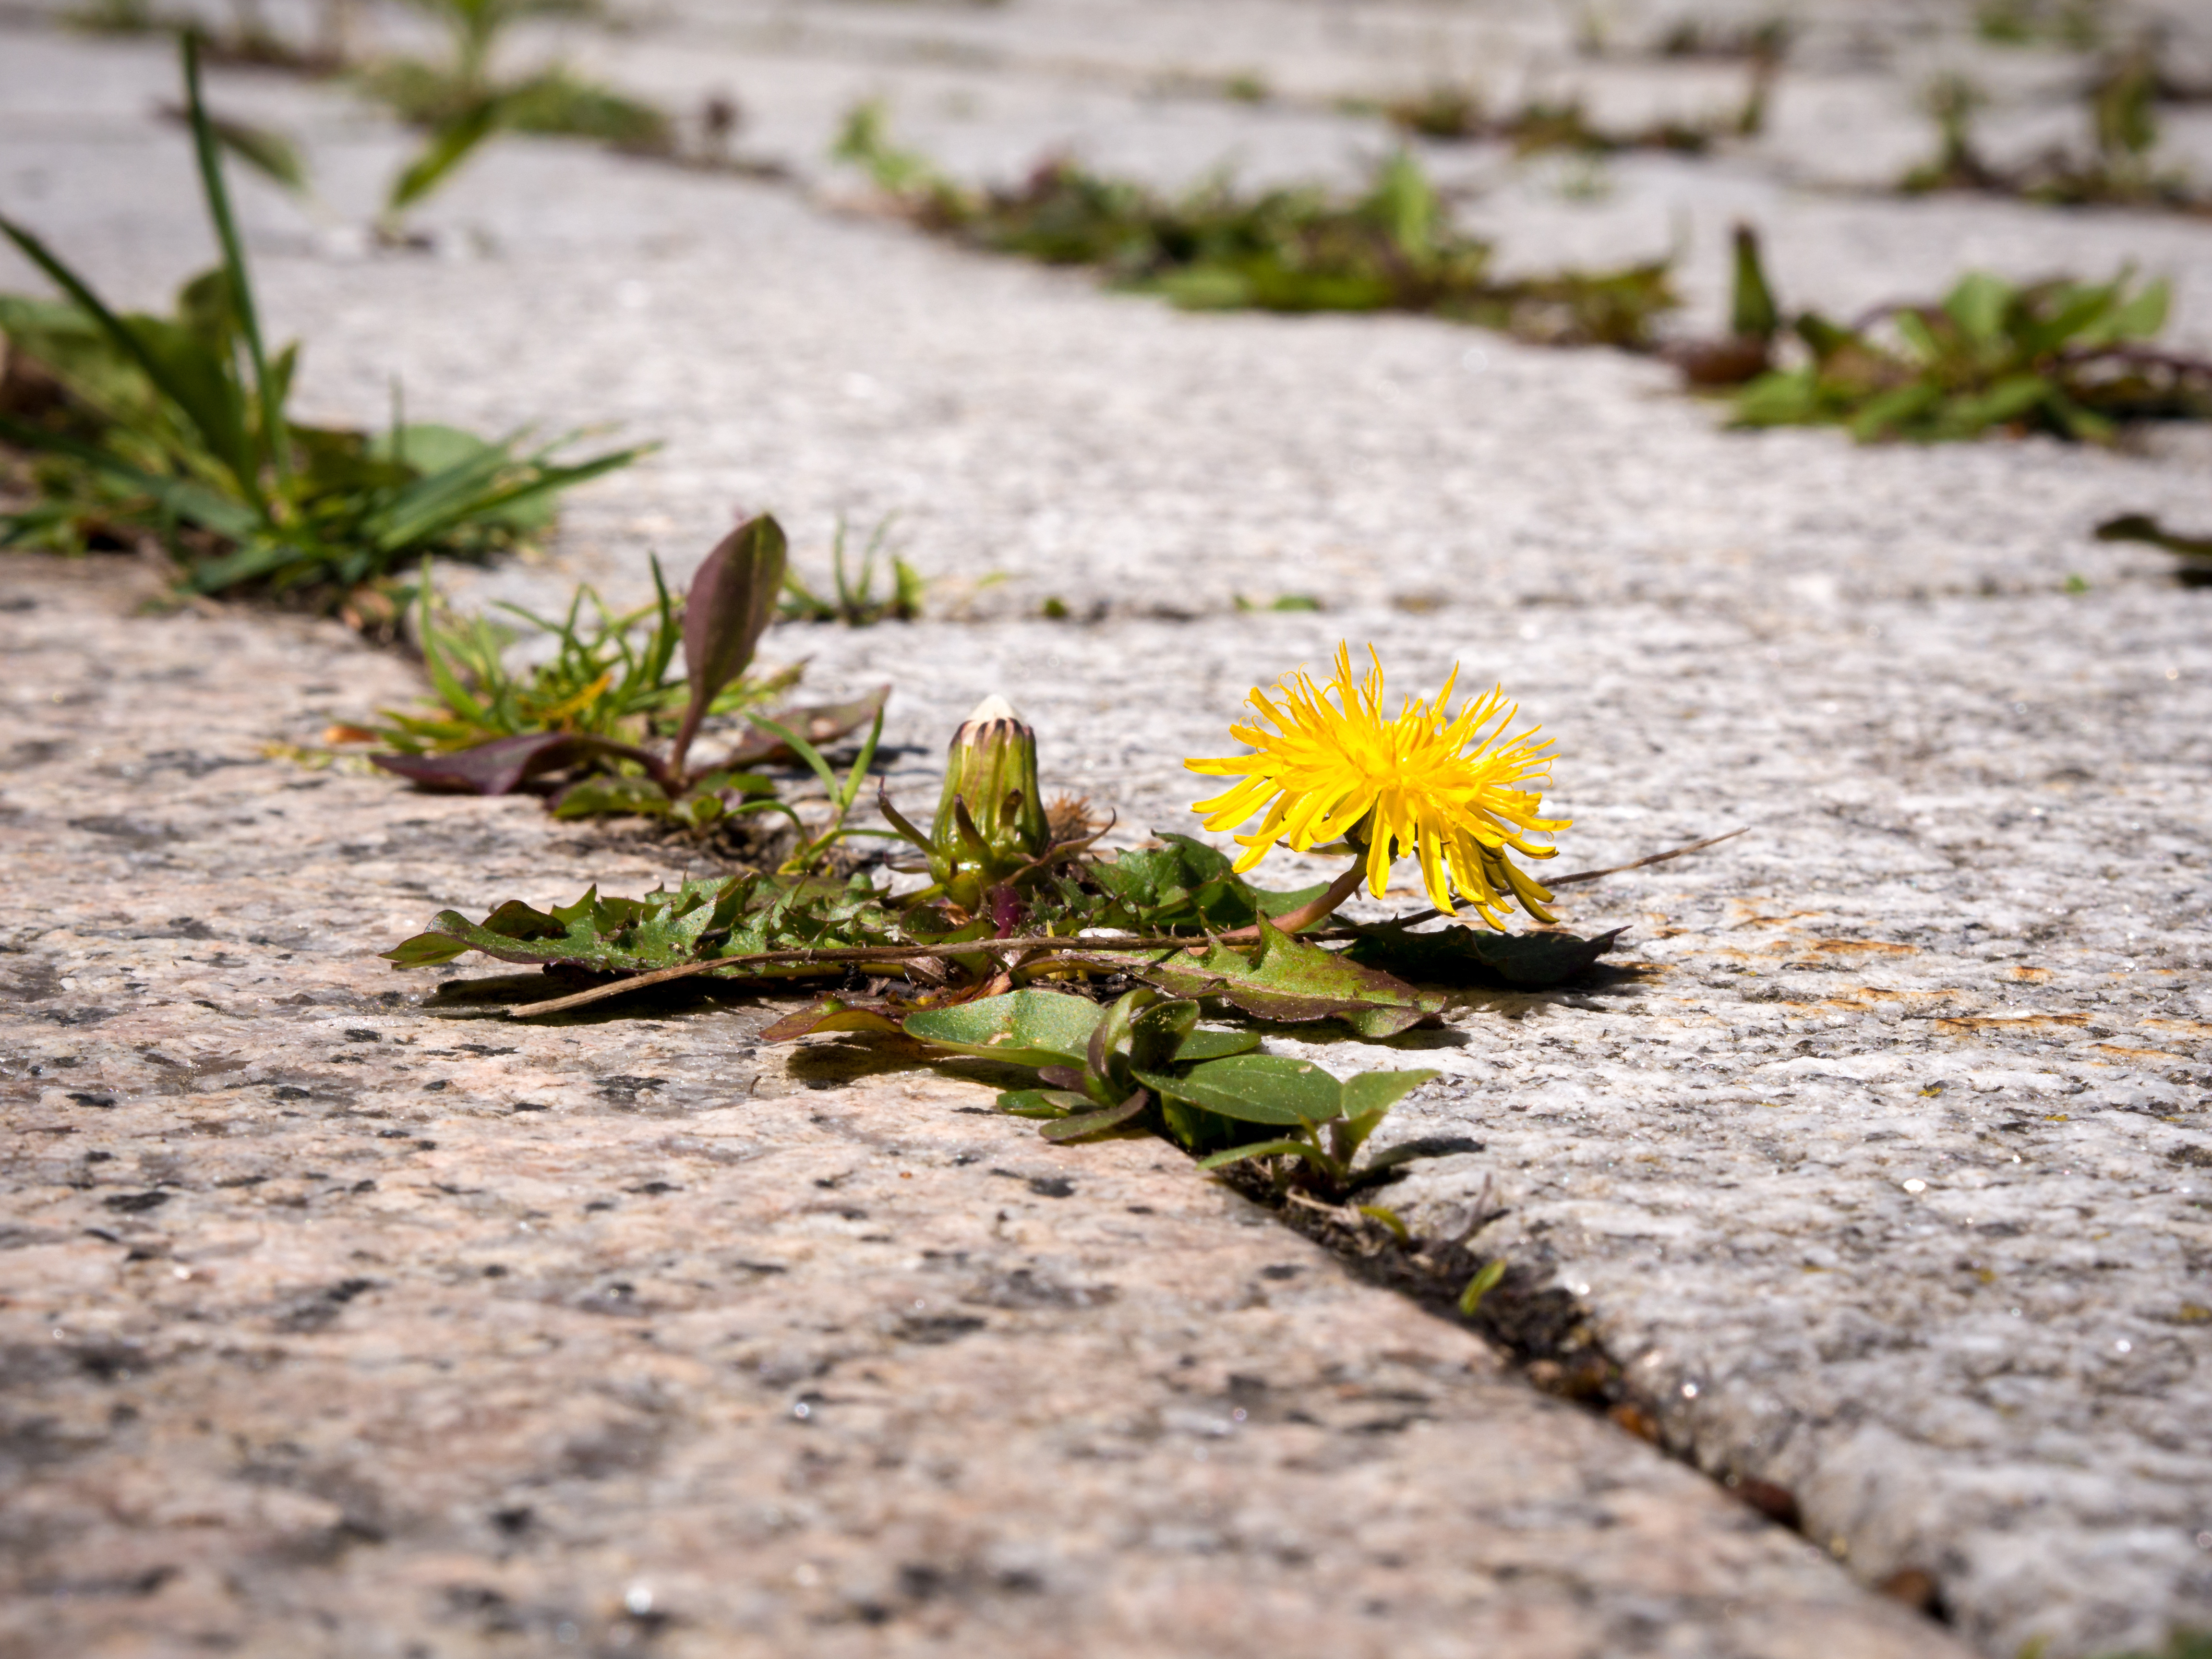 A closeup on a dandelion plant with one yellow bloom, growing between the cracks of a cement sidewalk.